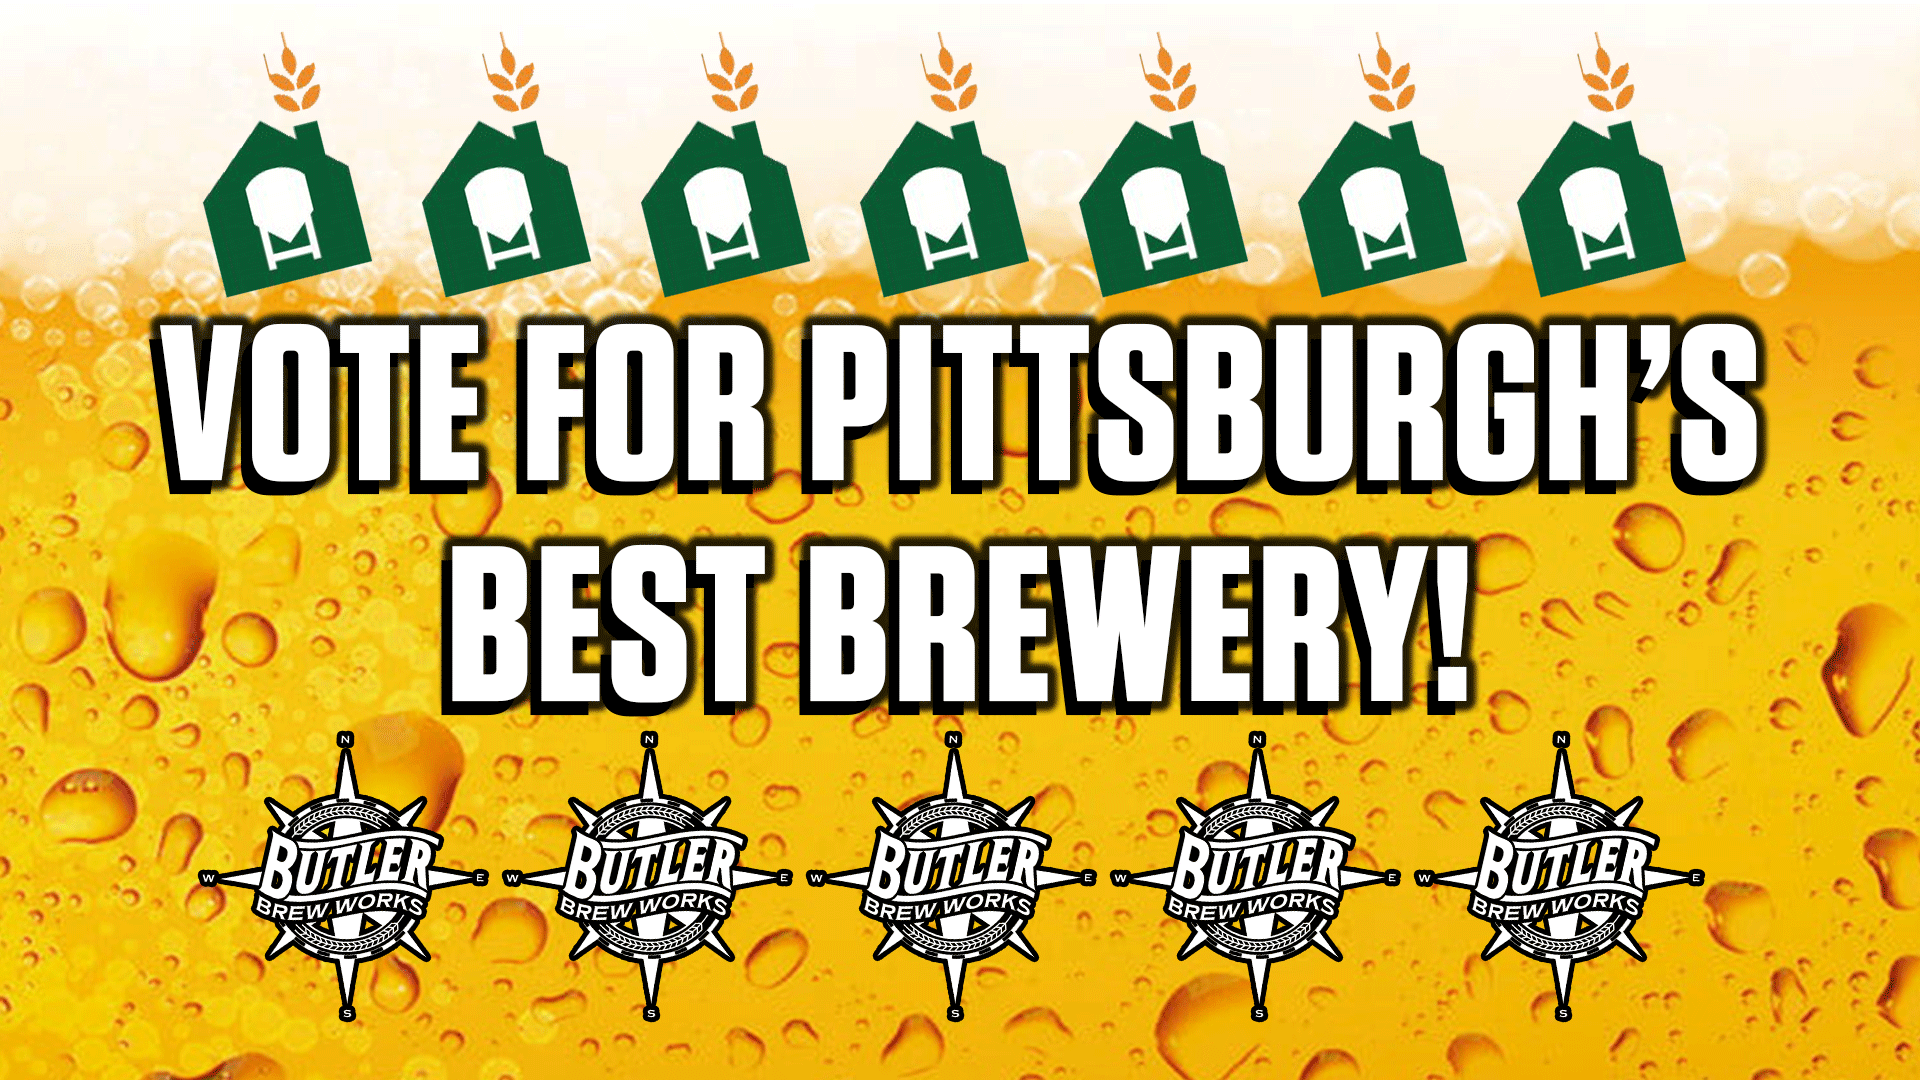 grist-house-butler-brew-works-pittsburgh-best-brewery-hampton-beer-outlet